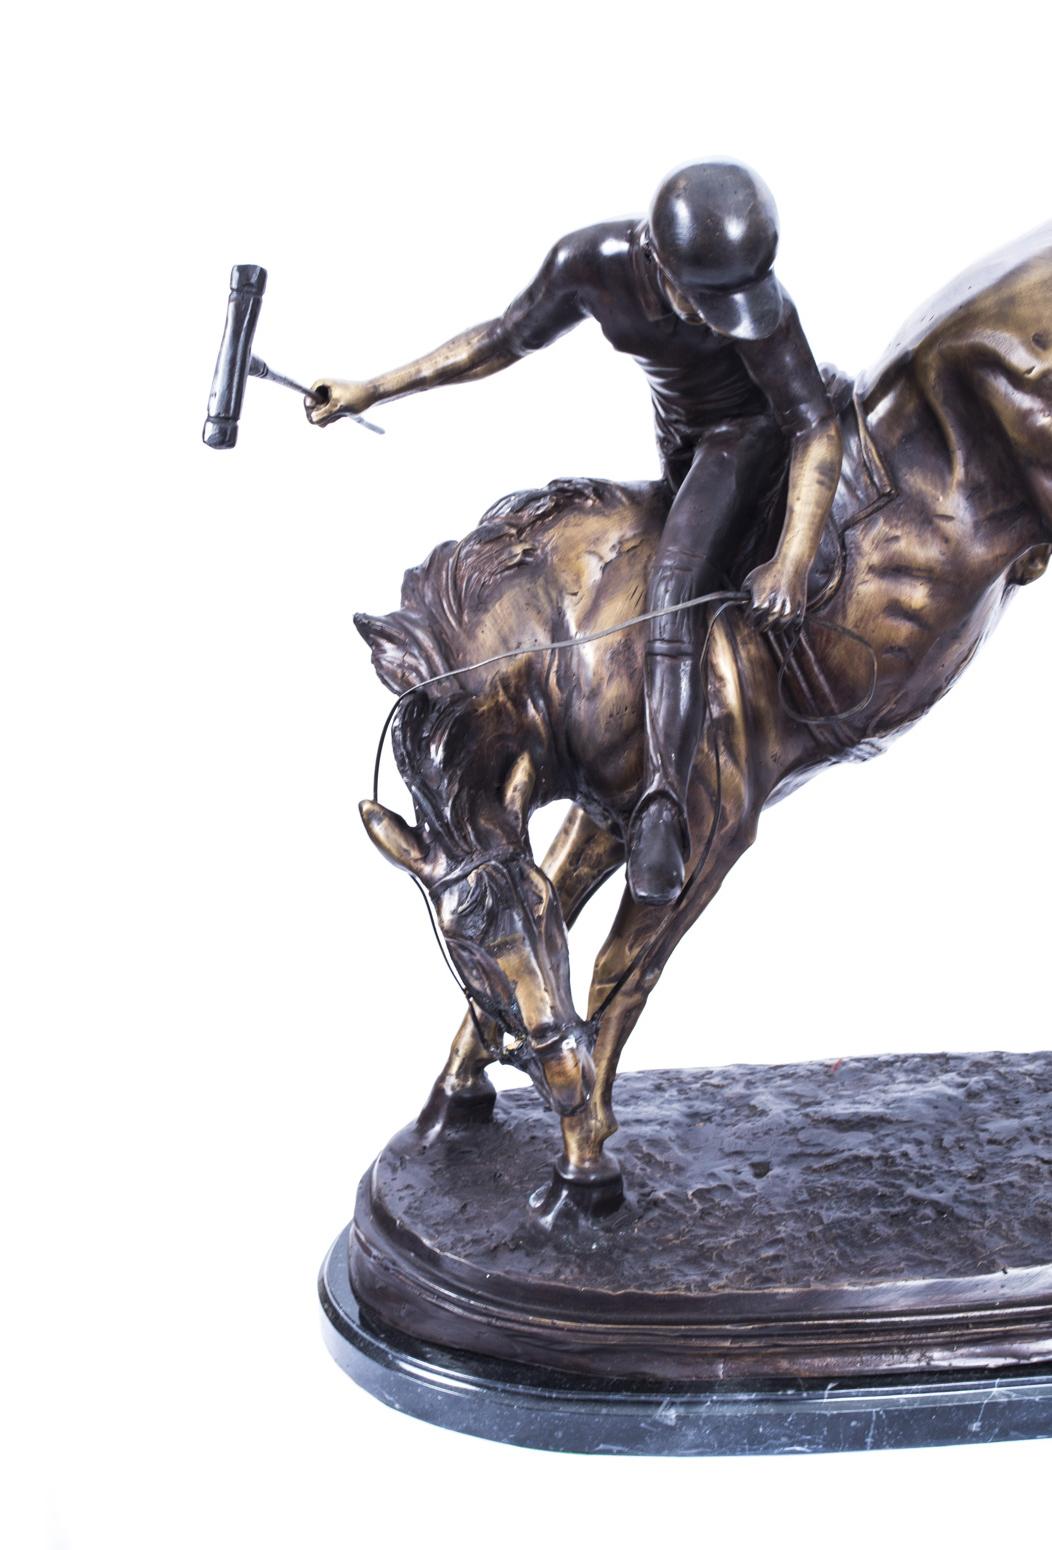 Vintage Bronze Polo Player Bucking a Horse Sculpture, 20th Century For Sale 4